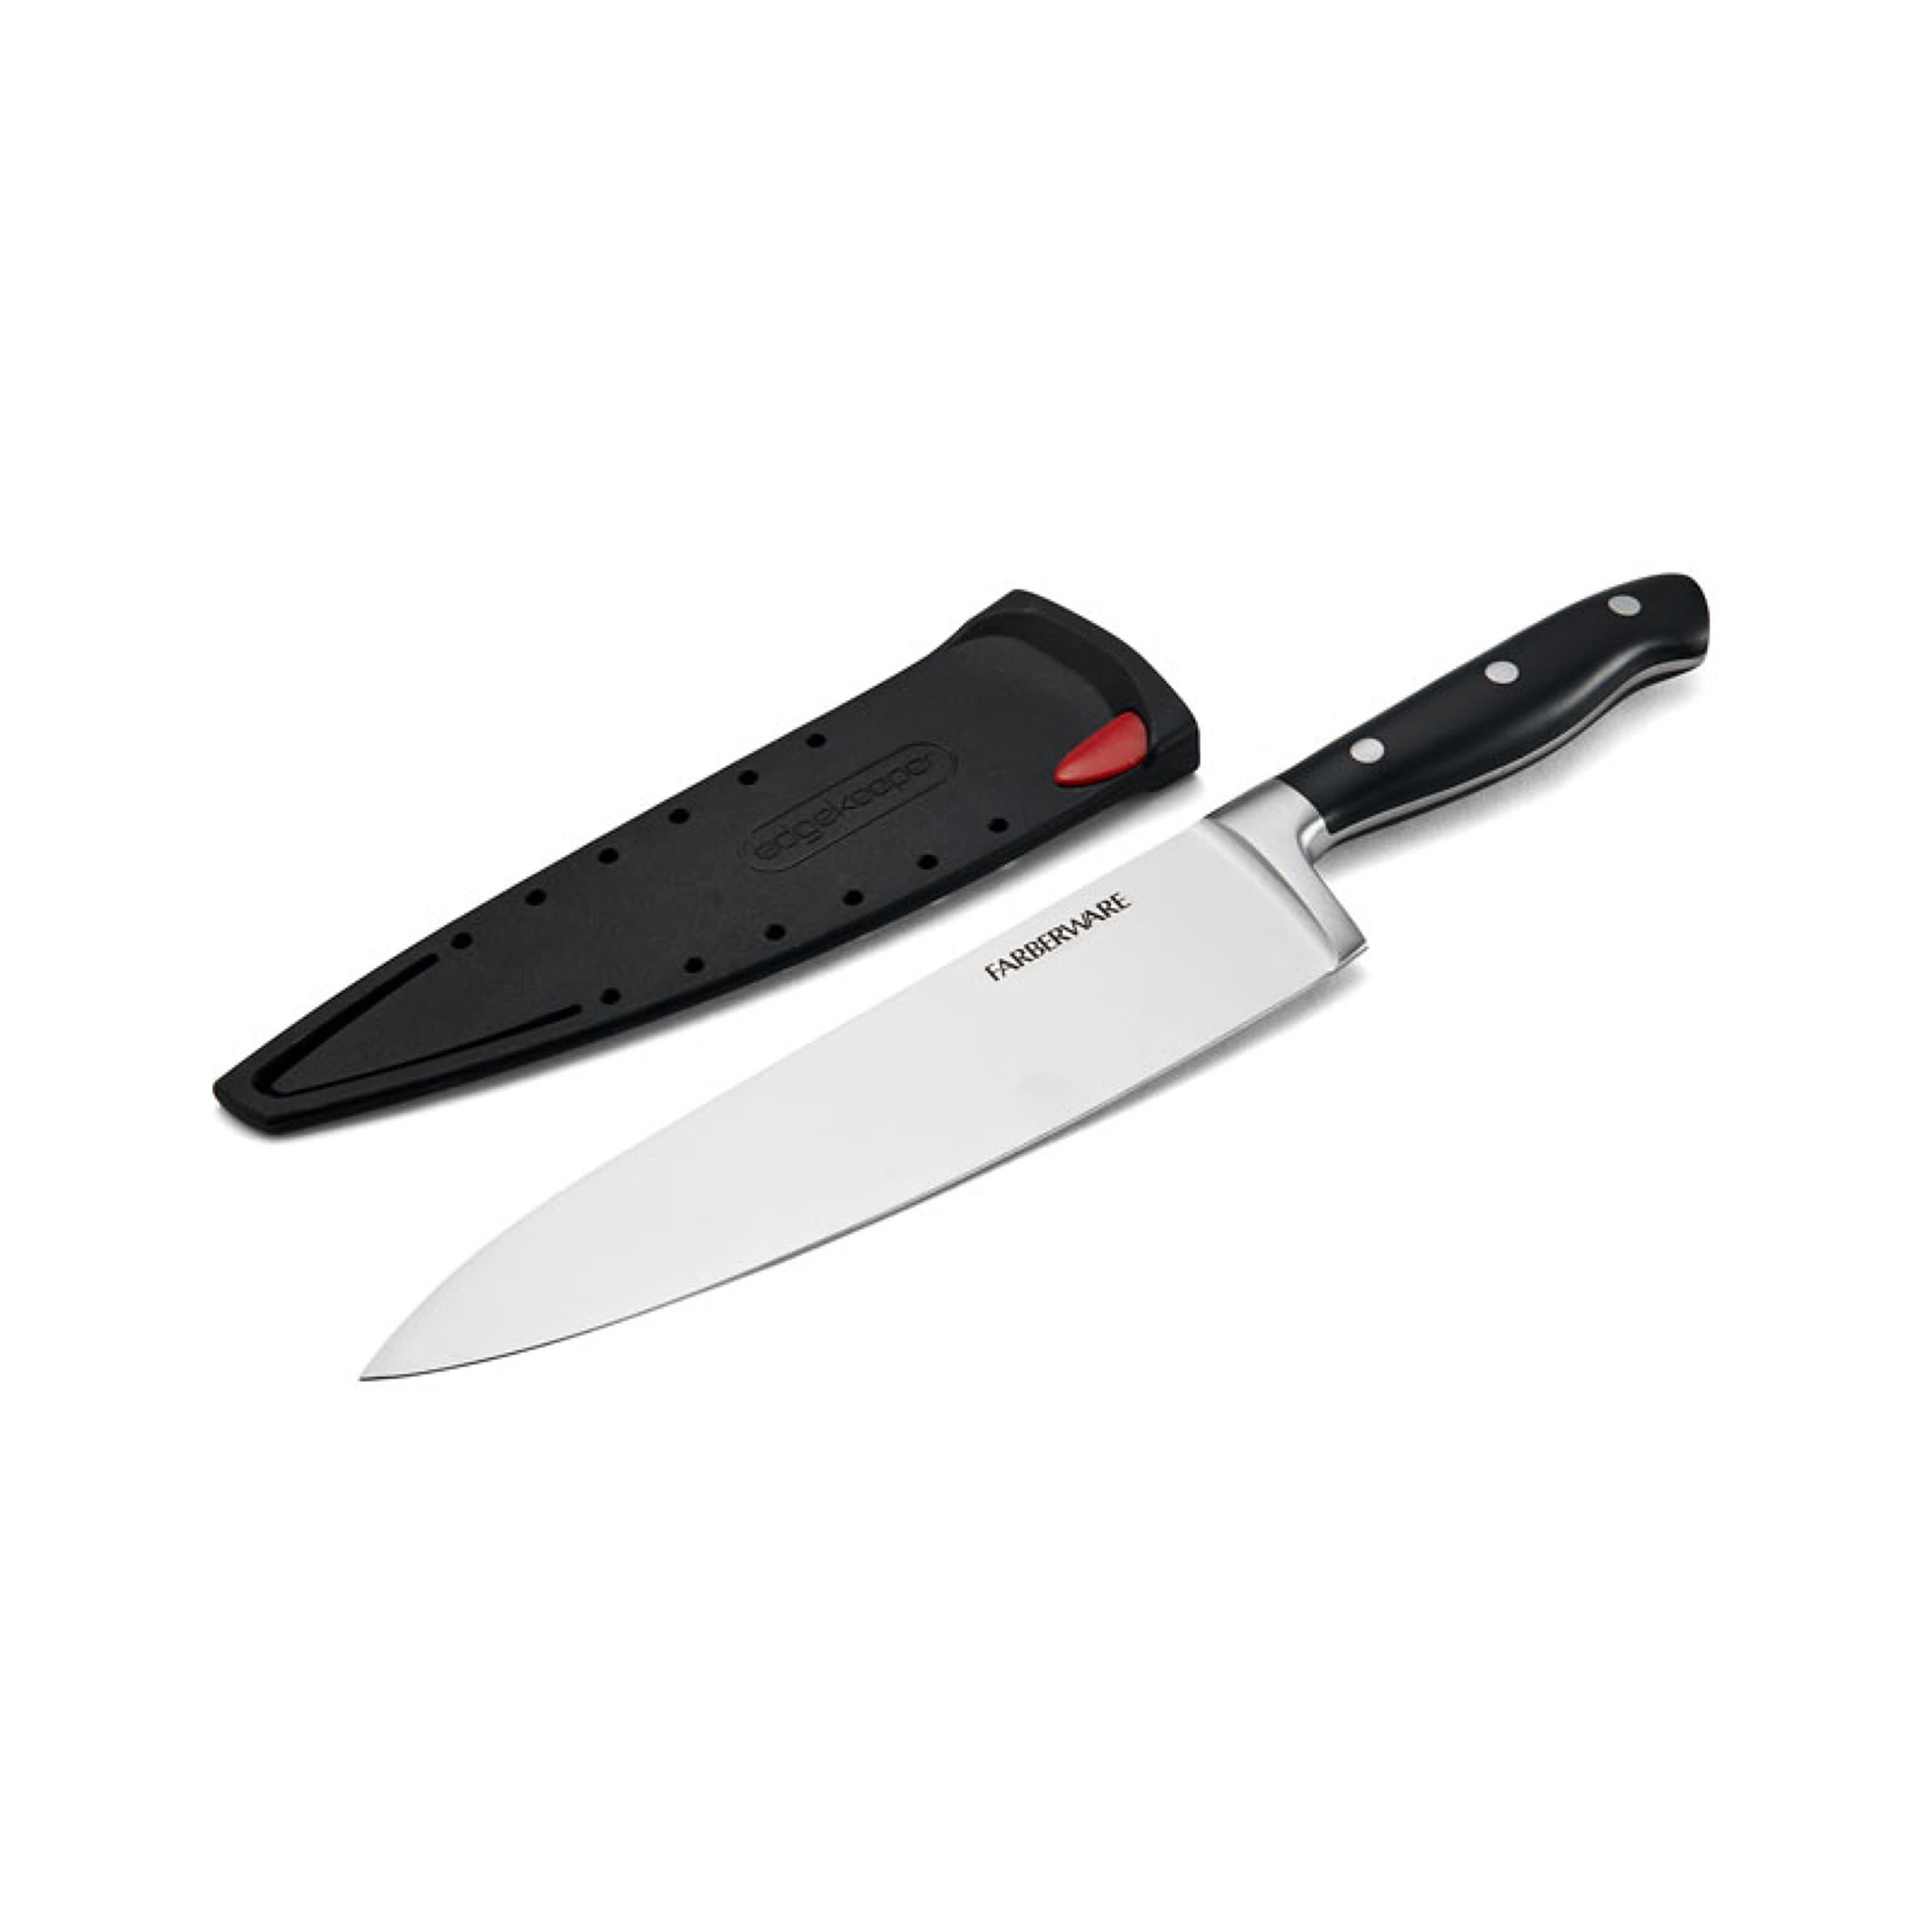 Farberware Edgekeeper 3 Stage Tabletop Kitchen Knife and Shear